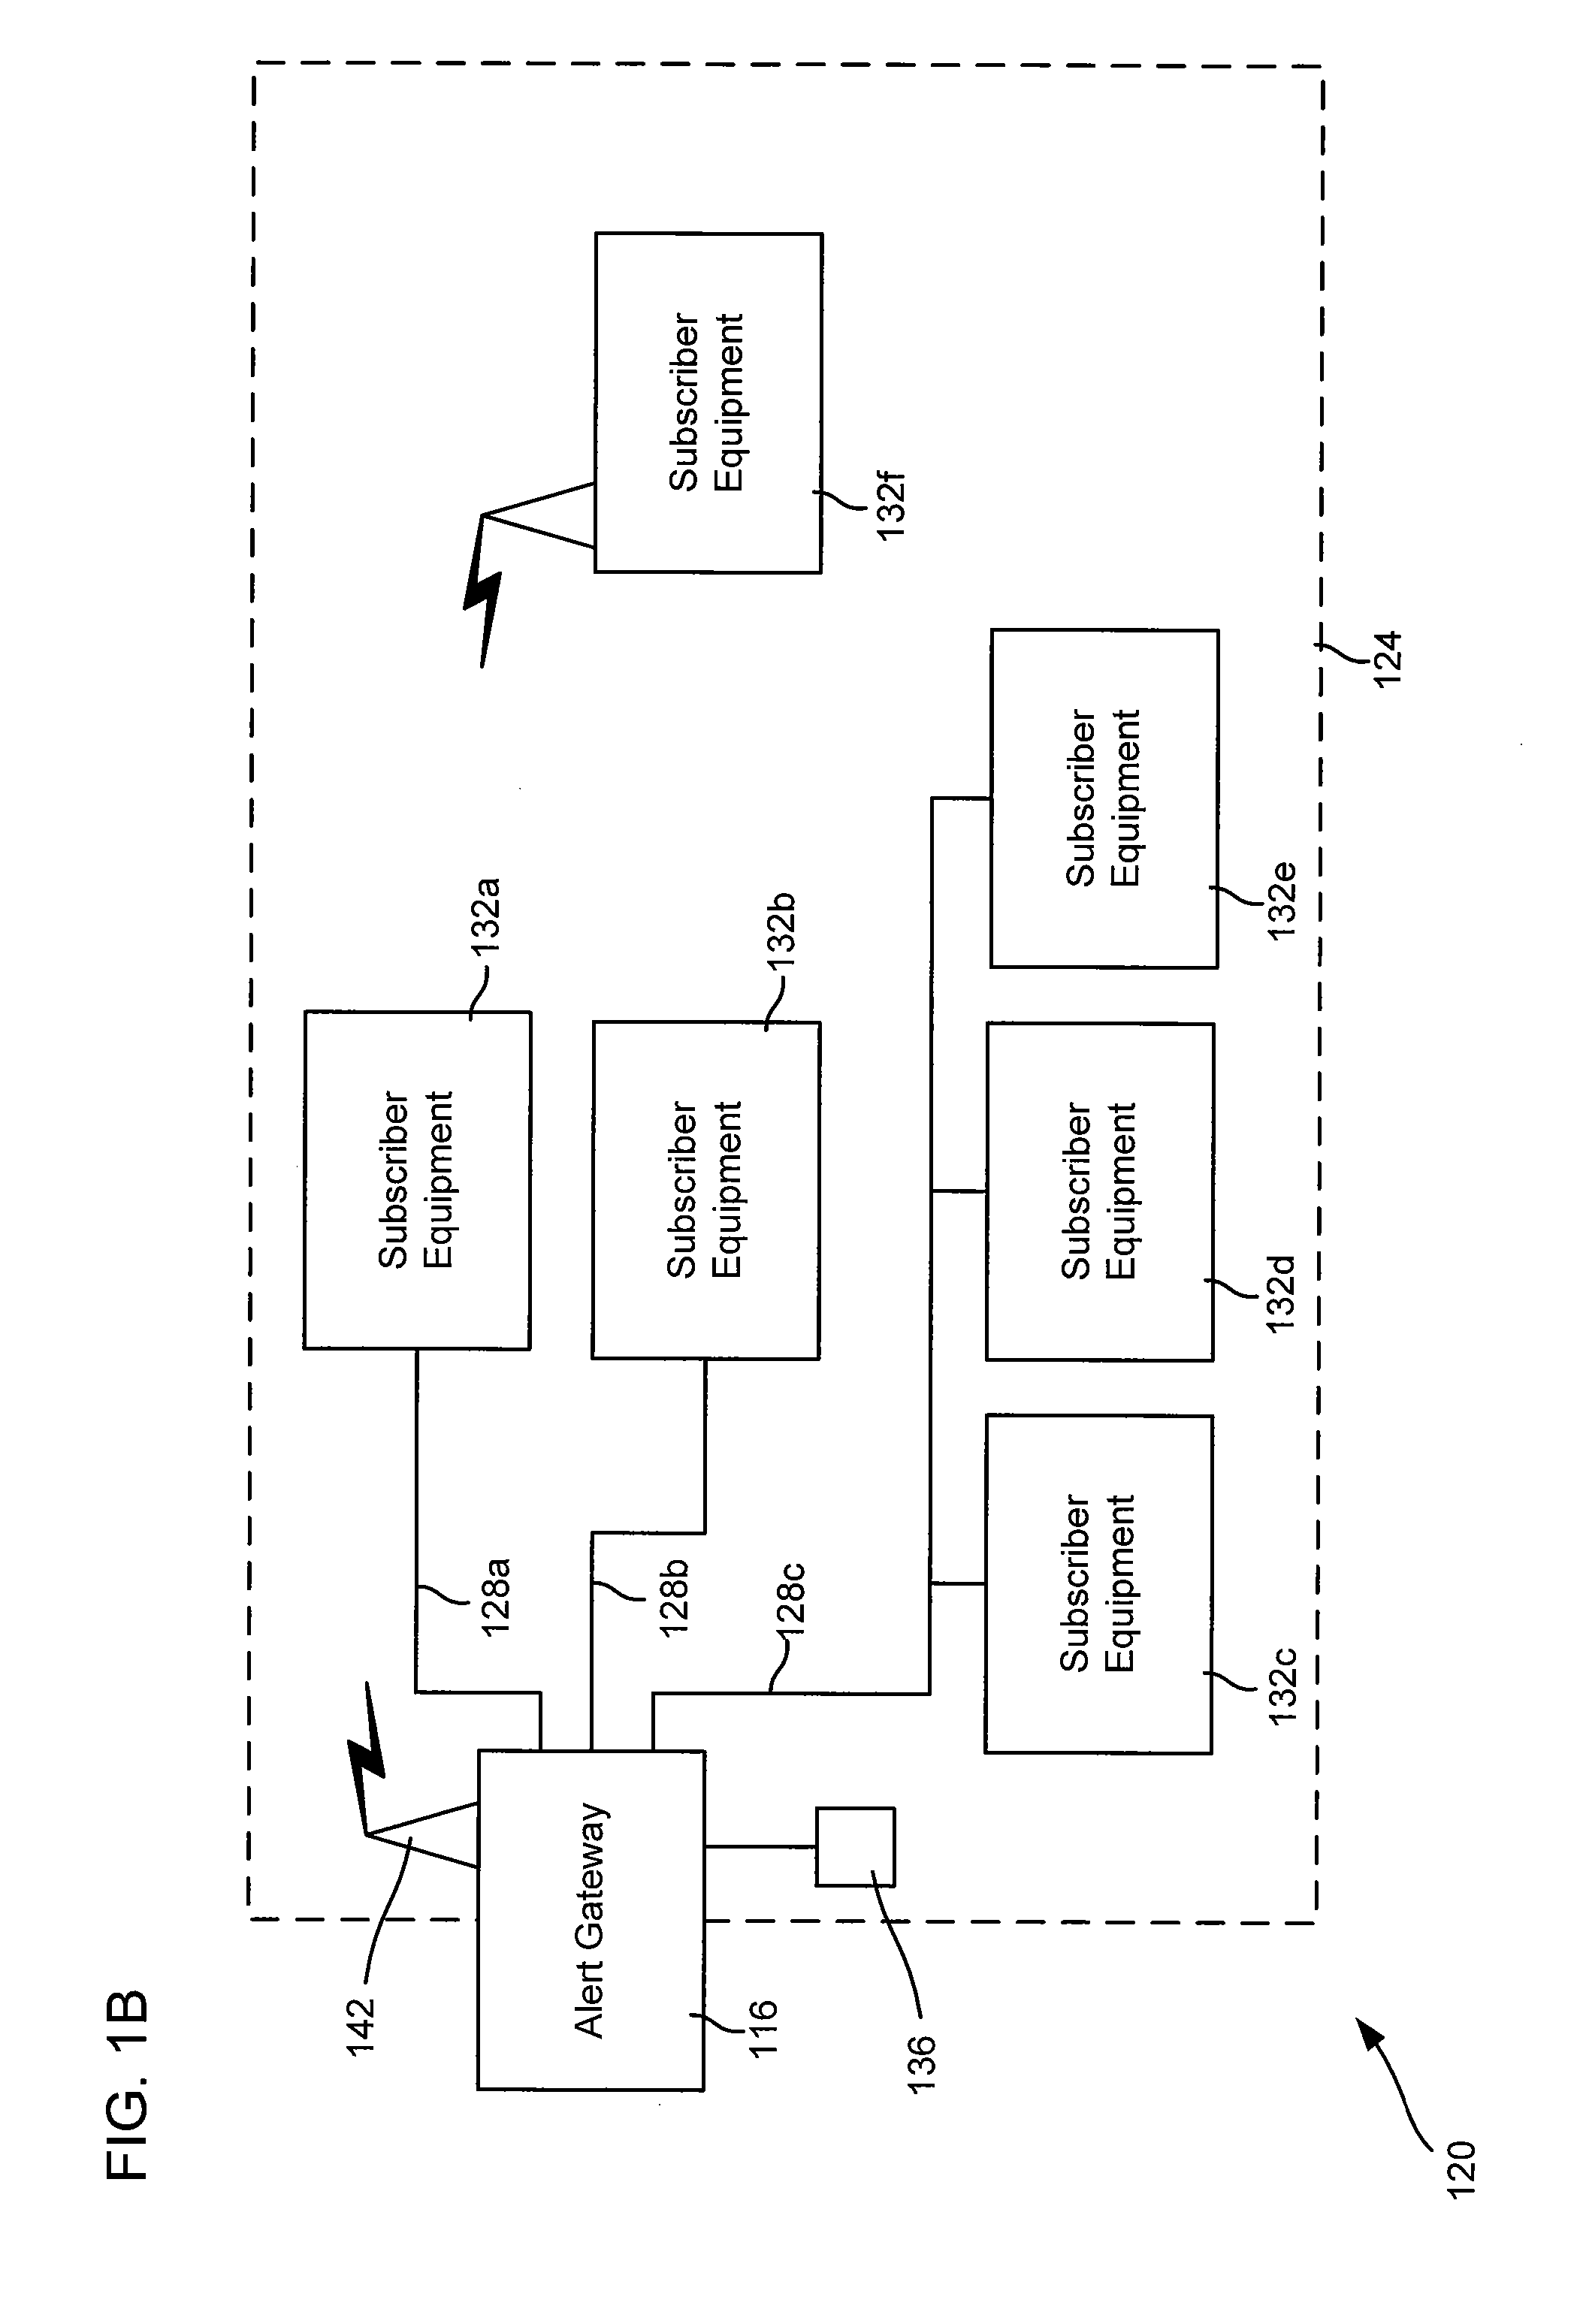 Methods, Systems and Apparatus for Providing Urgent Public Information